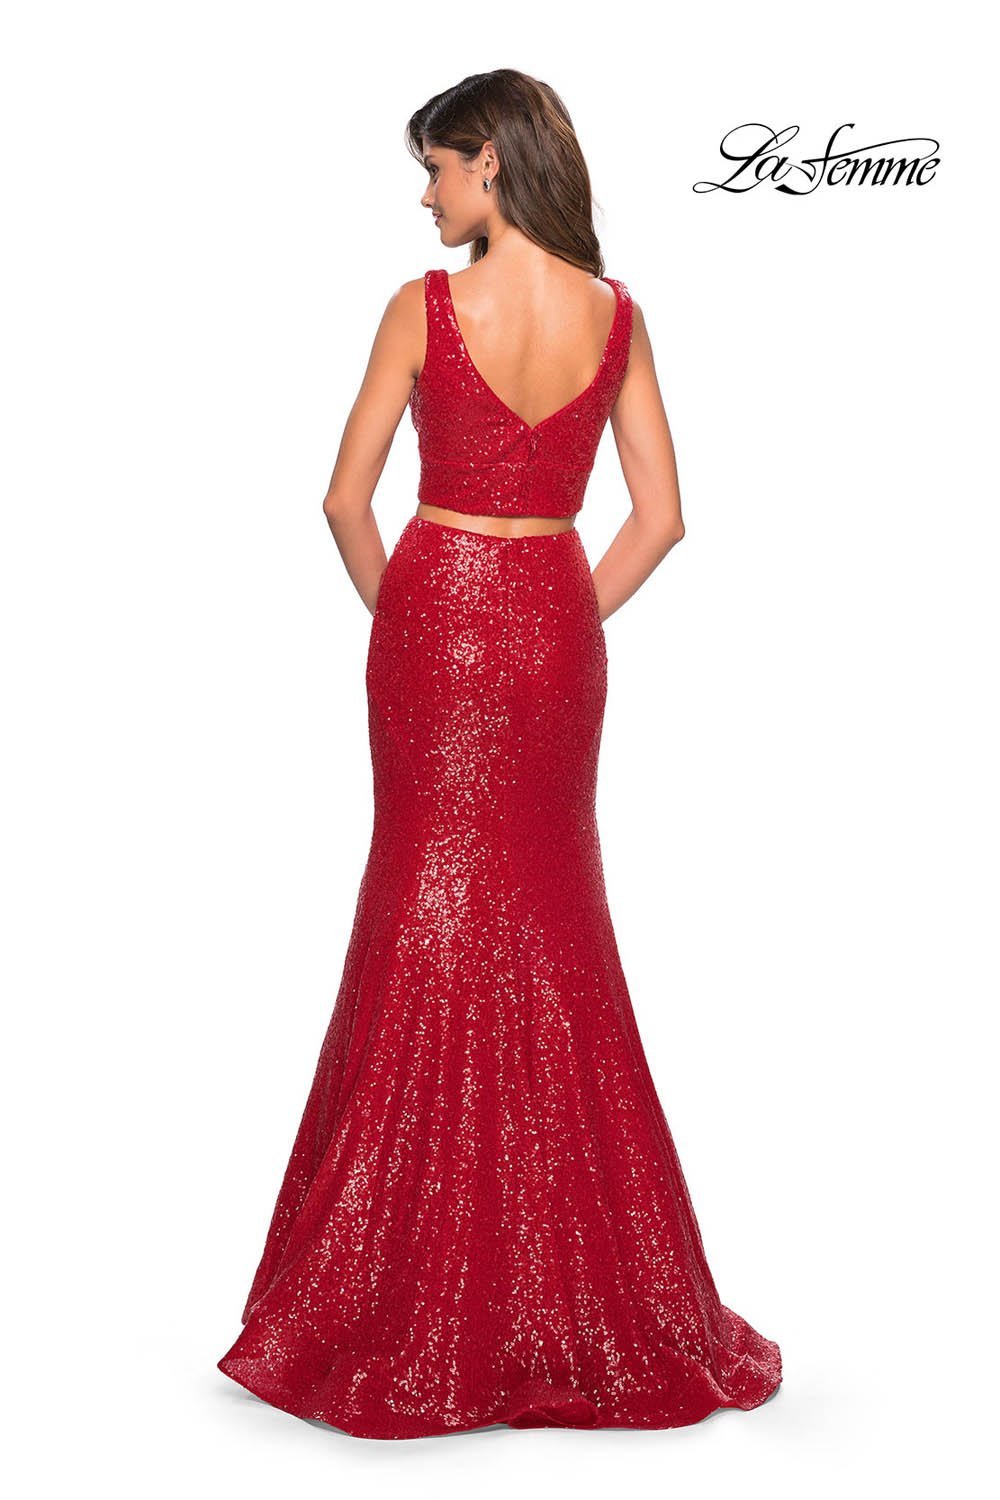 La Femme 27590 dress images in these colors: Navy, Red.